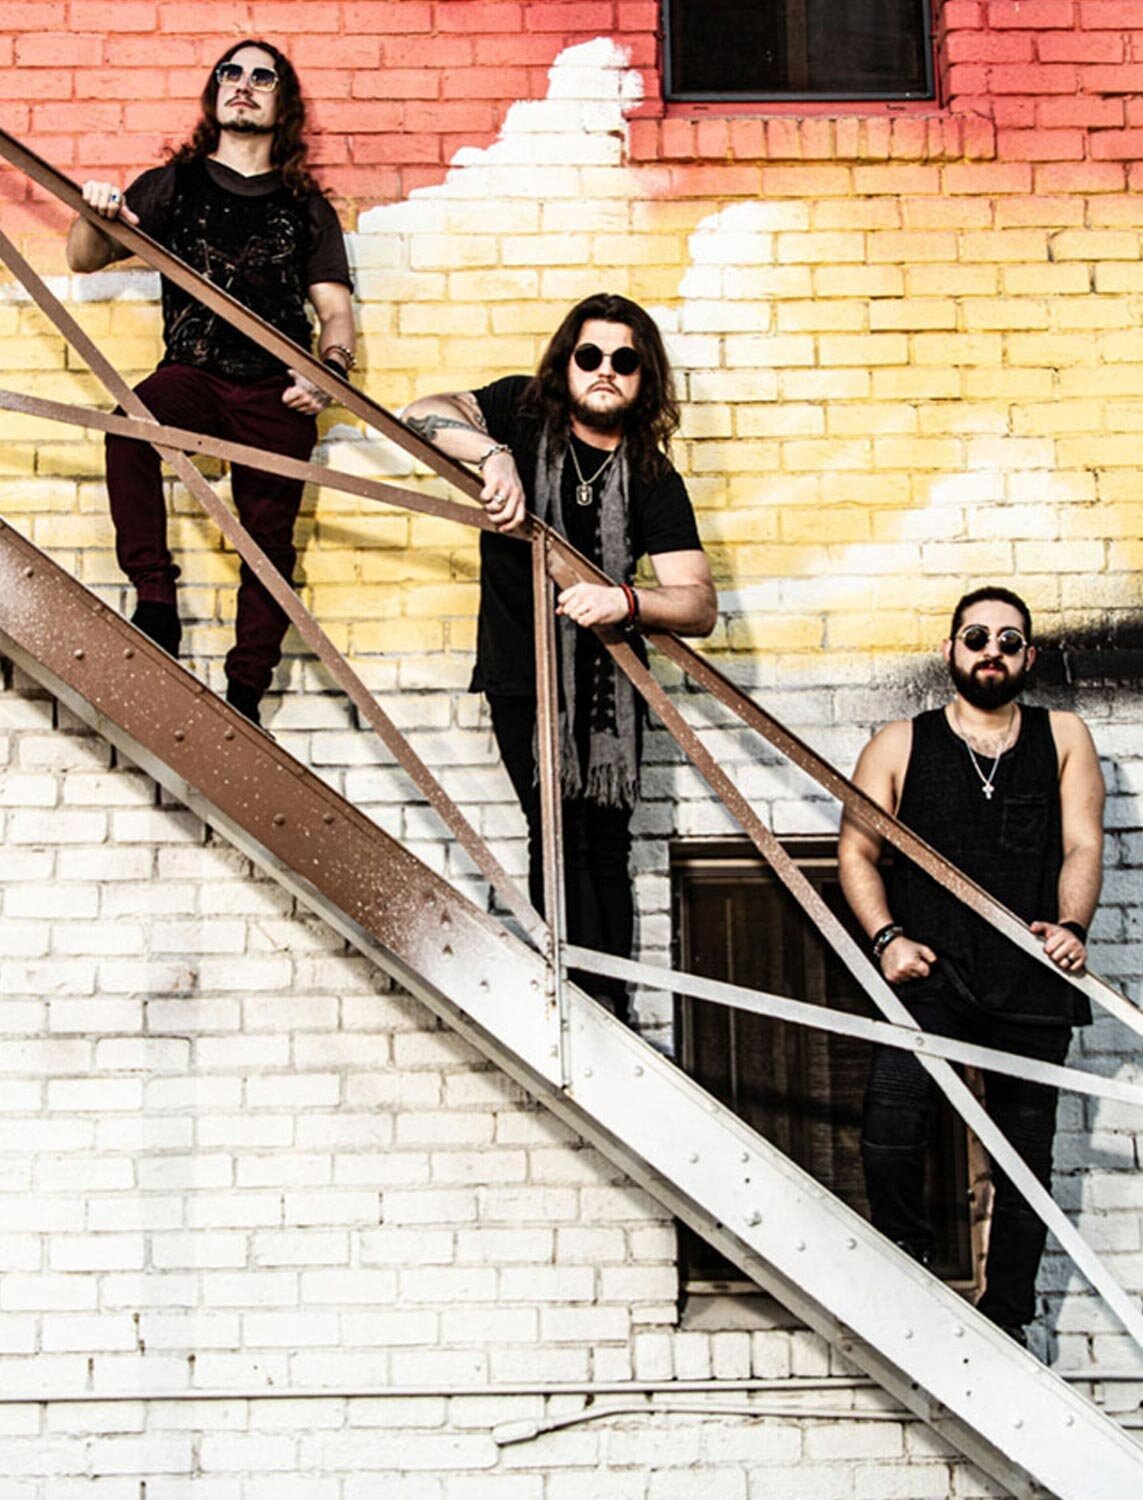 Los Angeles Photographer interview Mark Maryanovich feature Talent In Borders publication band photo three members staggered on metal staircase against brick wall painted white red and yellow page 7